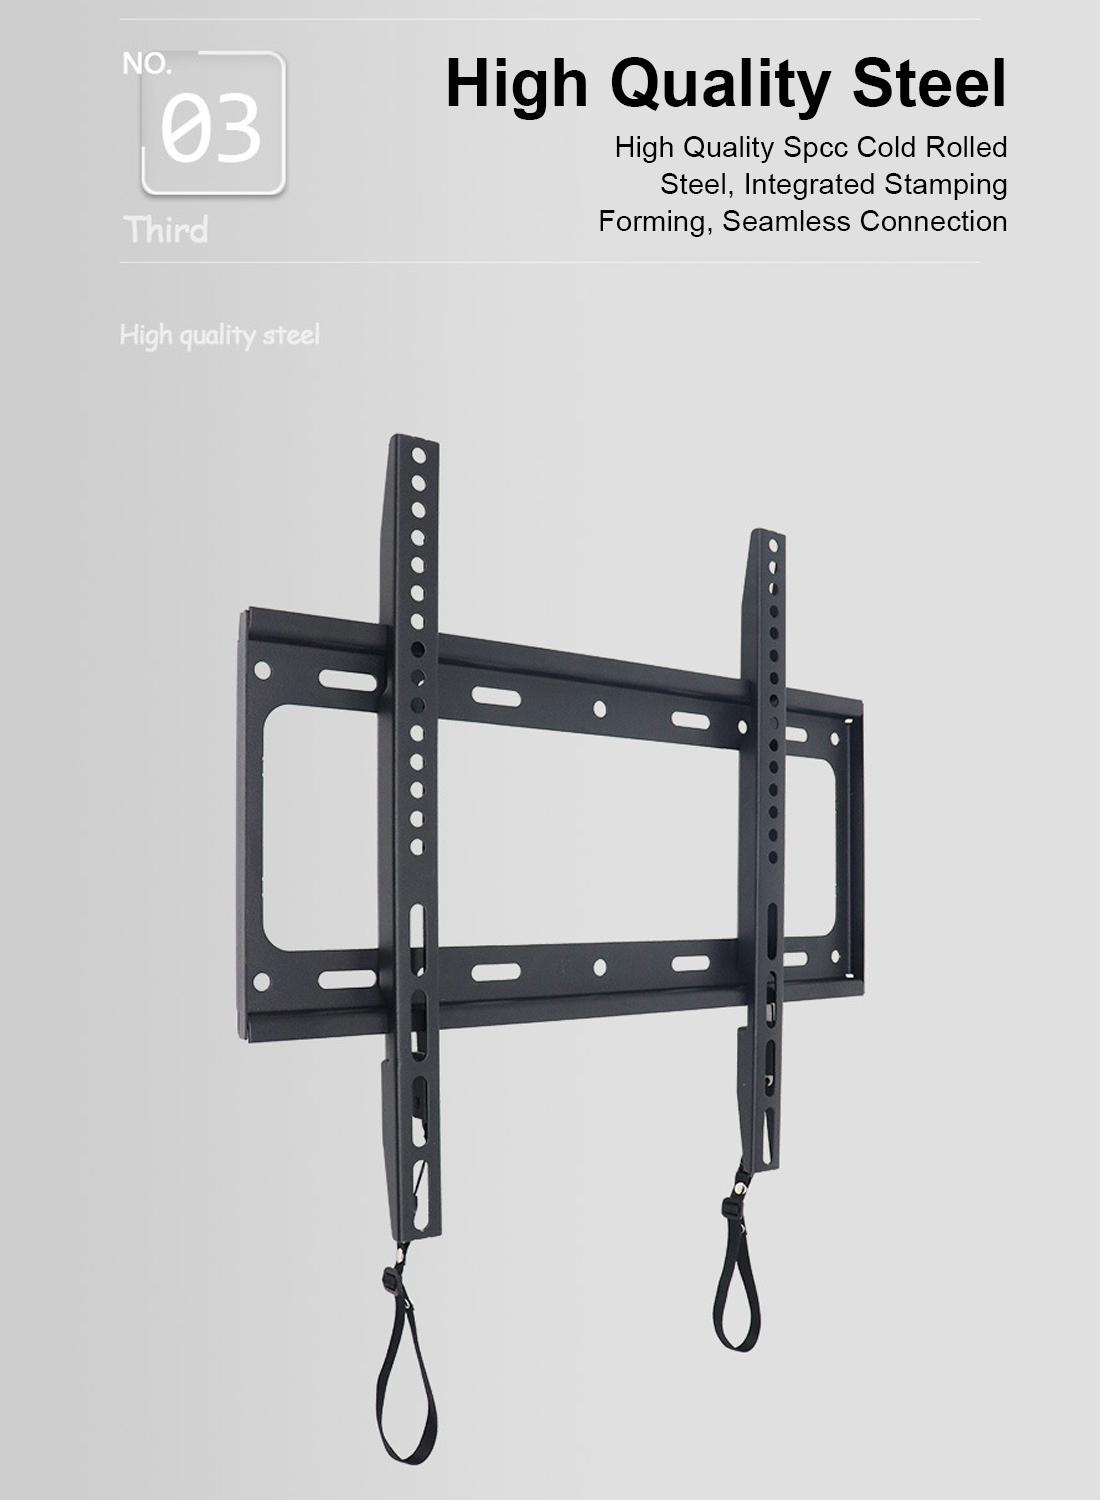 TV Wall Mount Bracket for 26 to 65 Inch Flat Screen LED, LCD TV’S Low Profile, Fixed and Space Saving TV Bracket